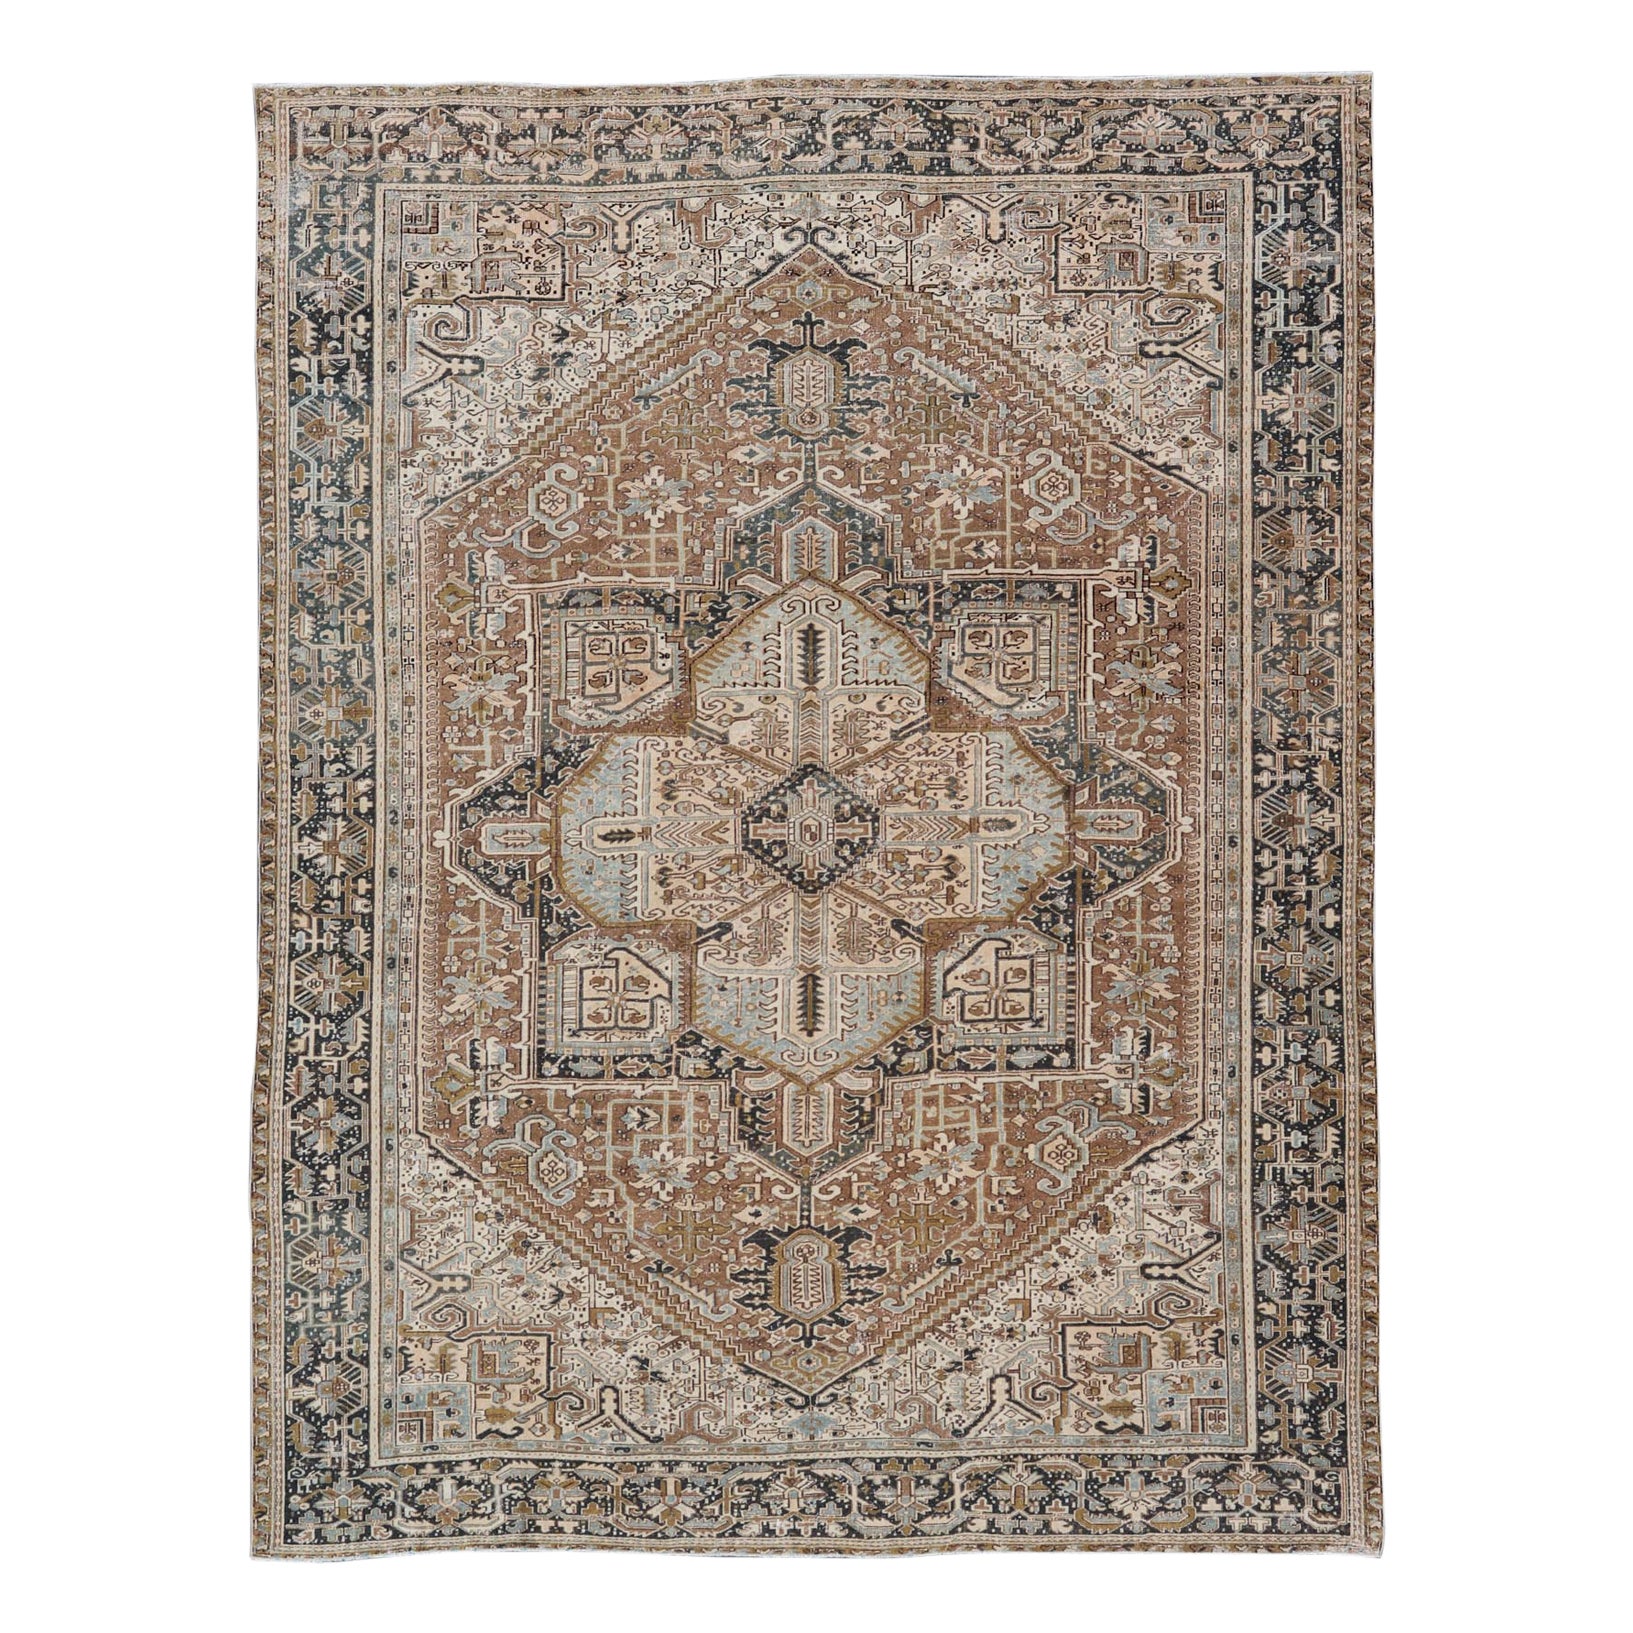 Persian Antique Heriz Rug with Geometric Design in Blue's, Tan, Cream, and Brown For Sale